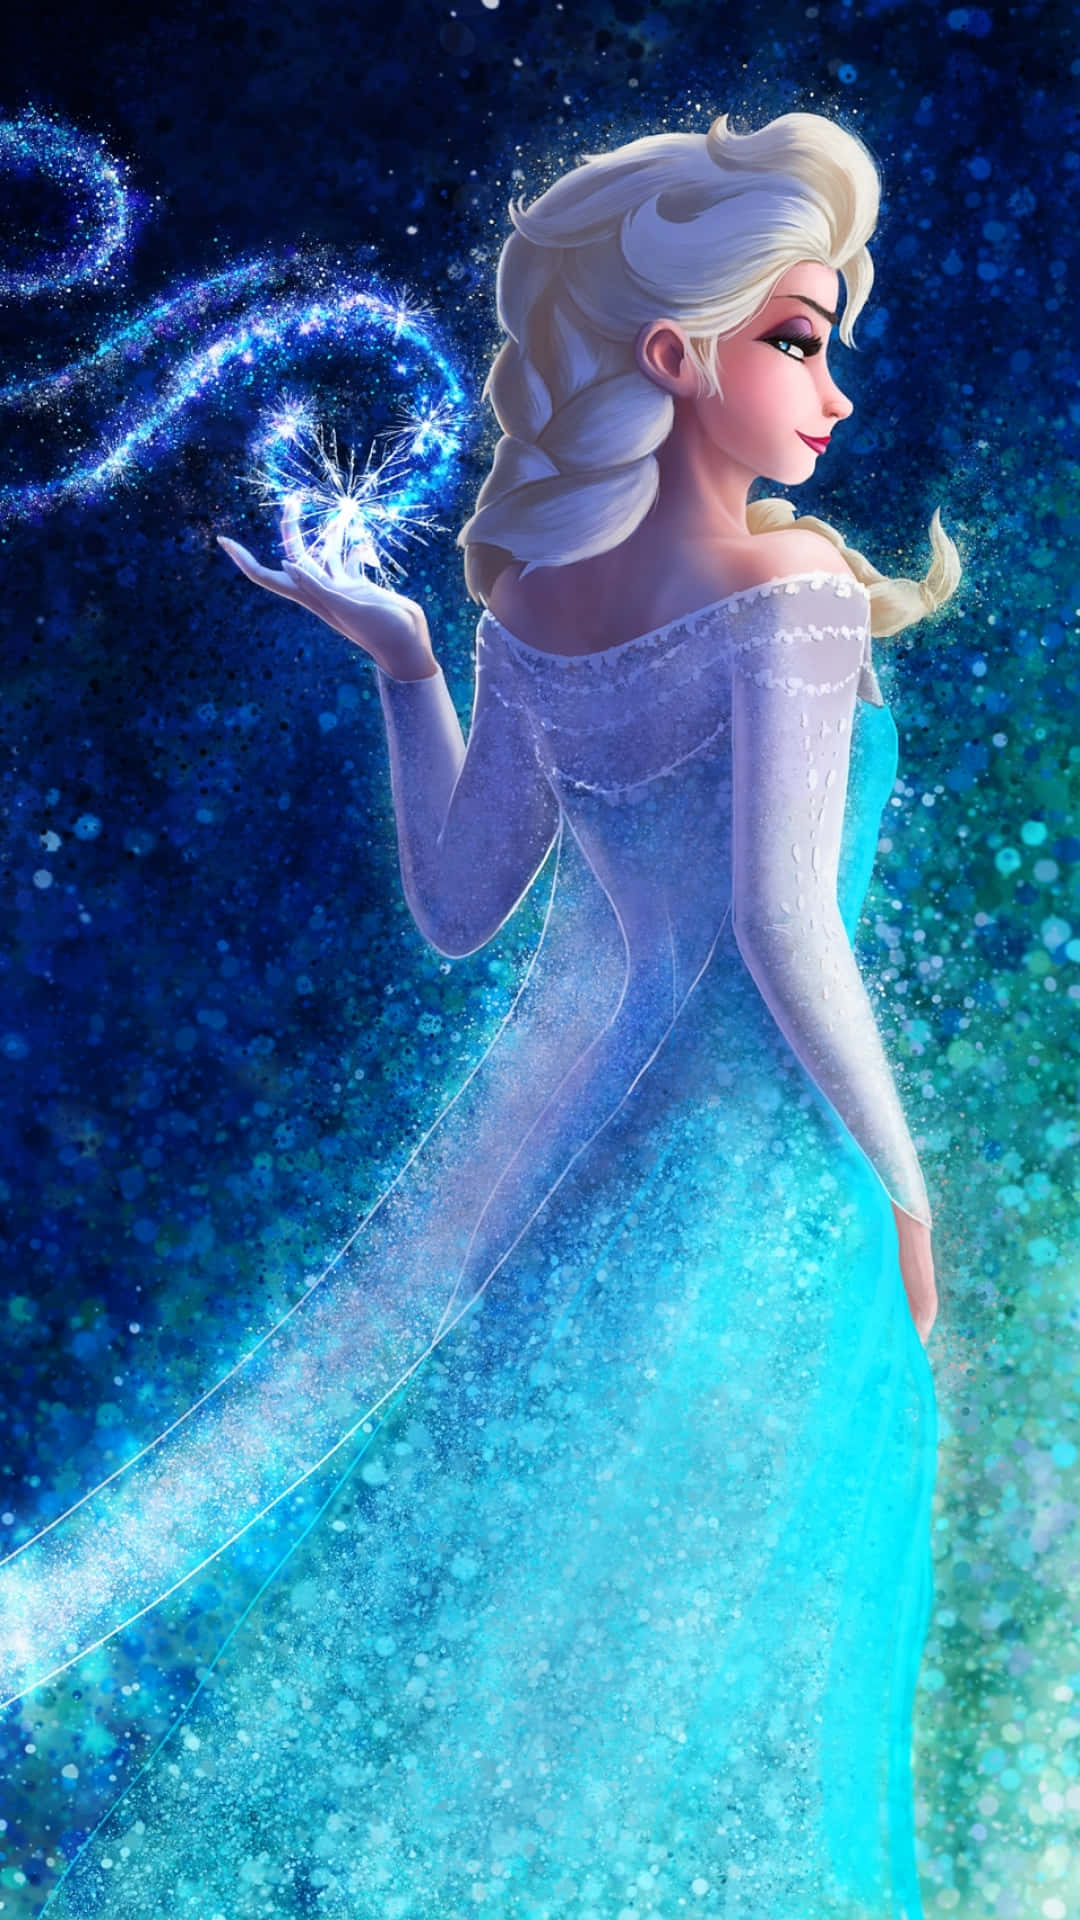 Get your hands on the new Elsa Phone today! Wallpaper